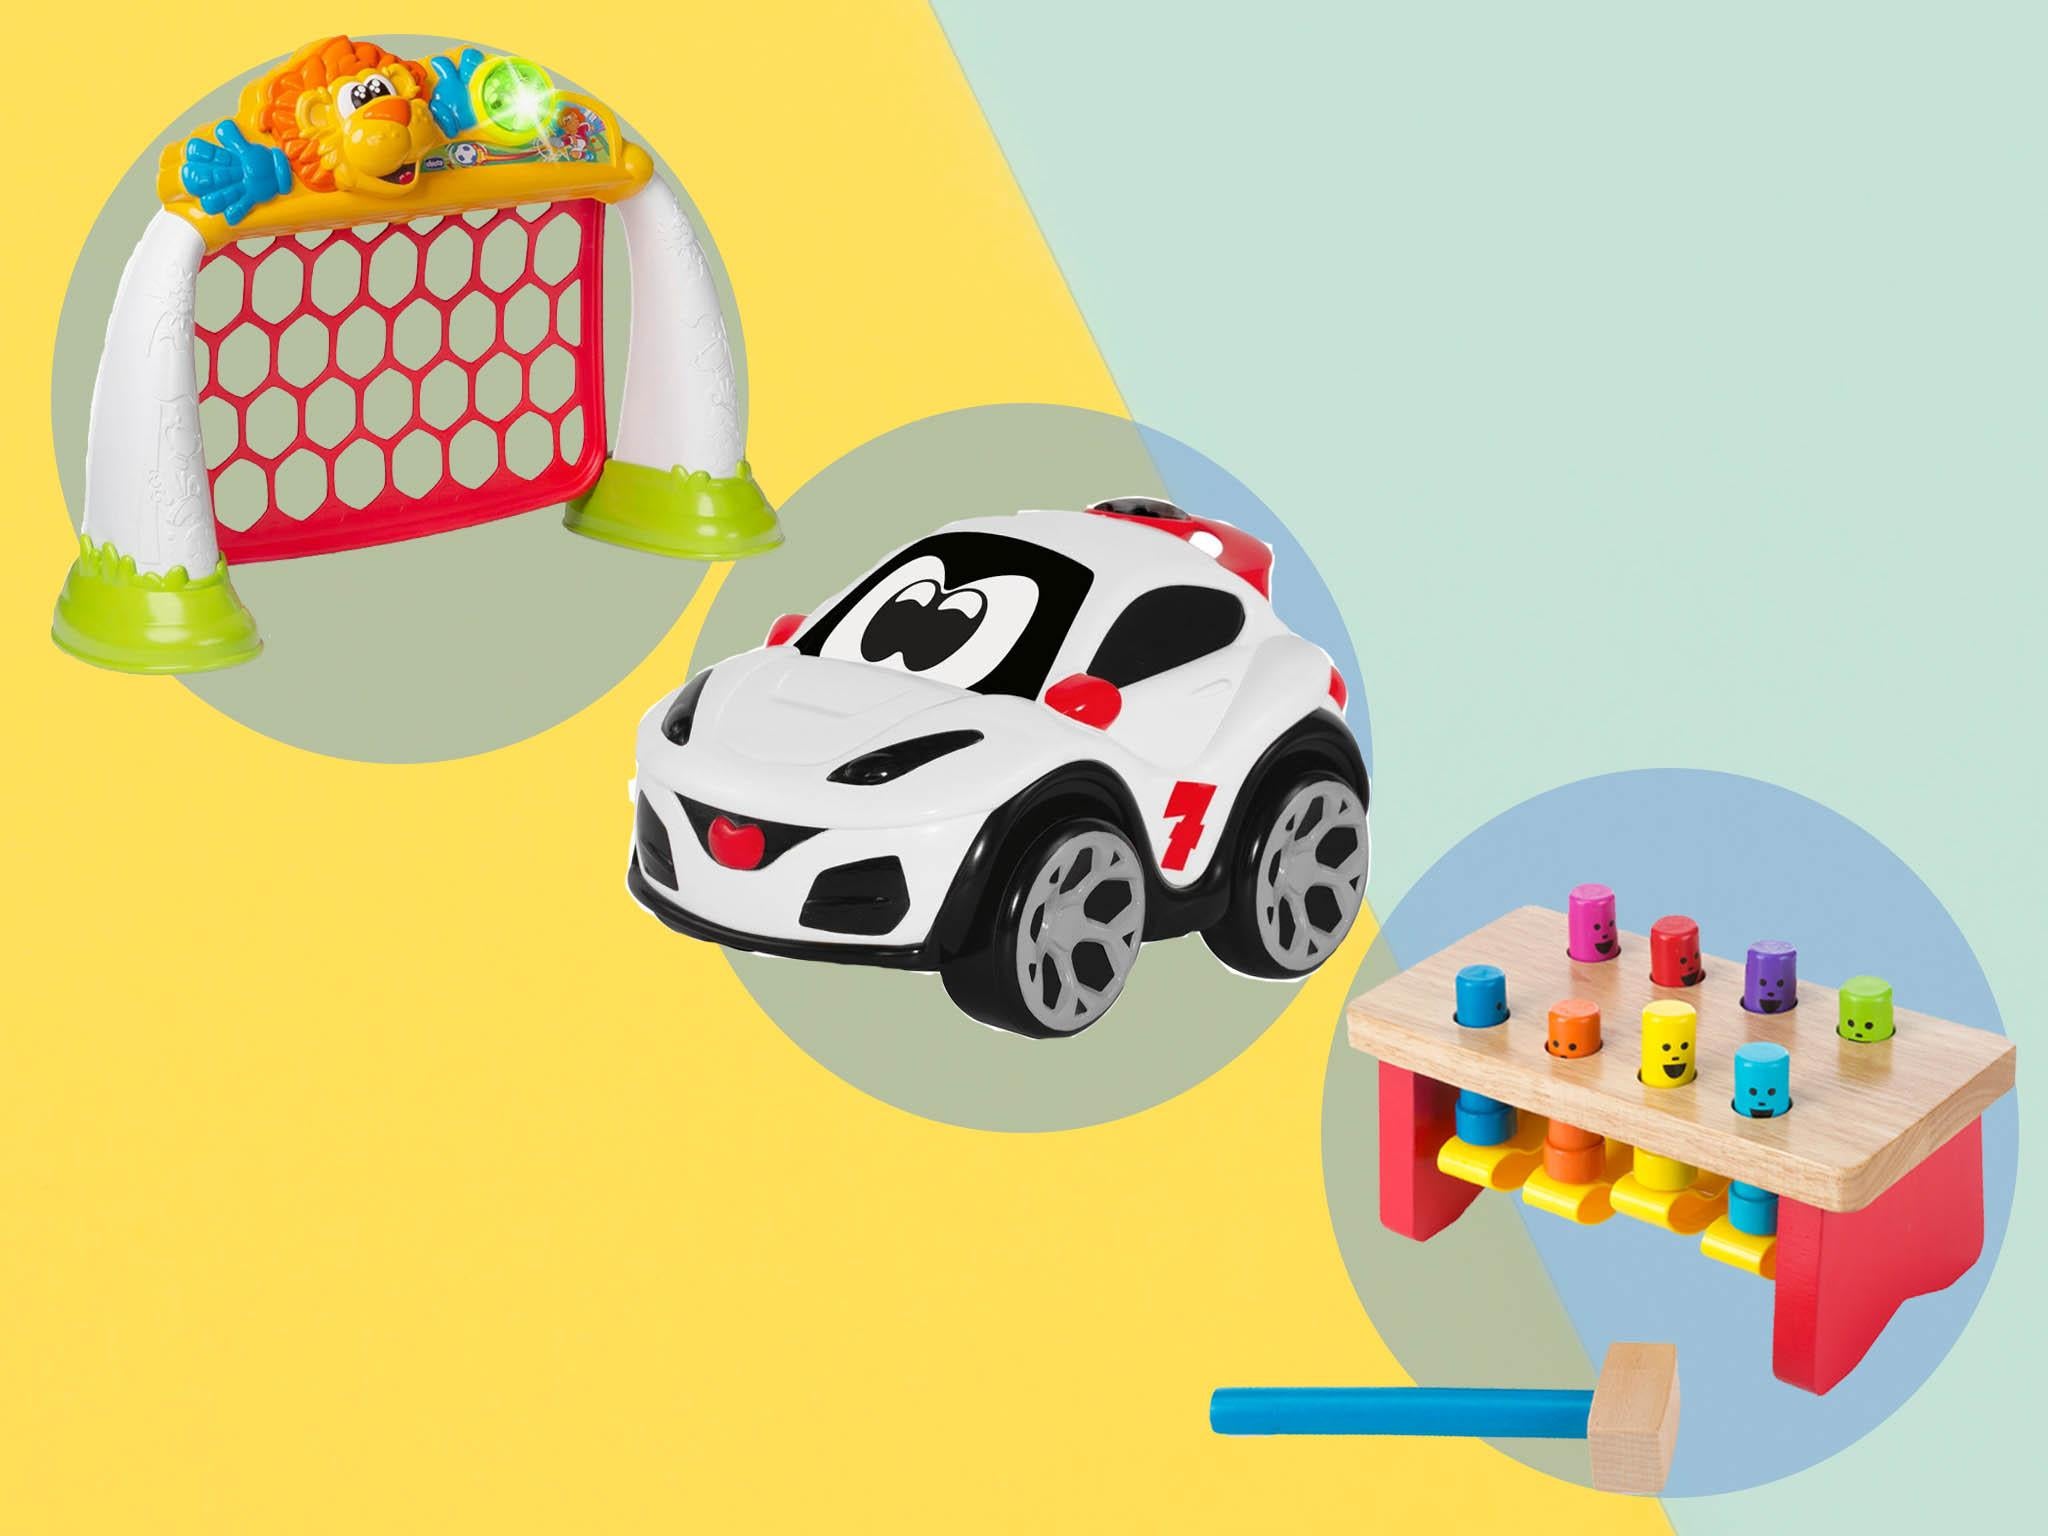 best toys for 2 year olds uk